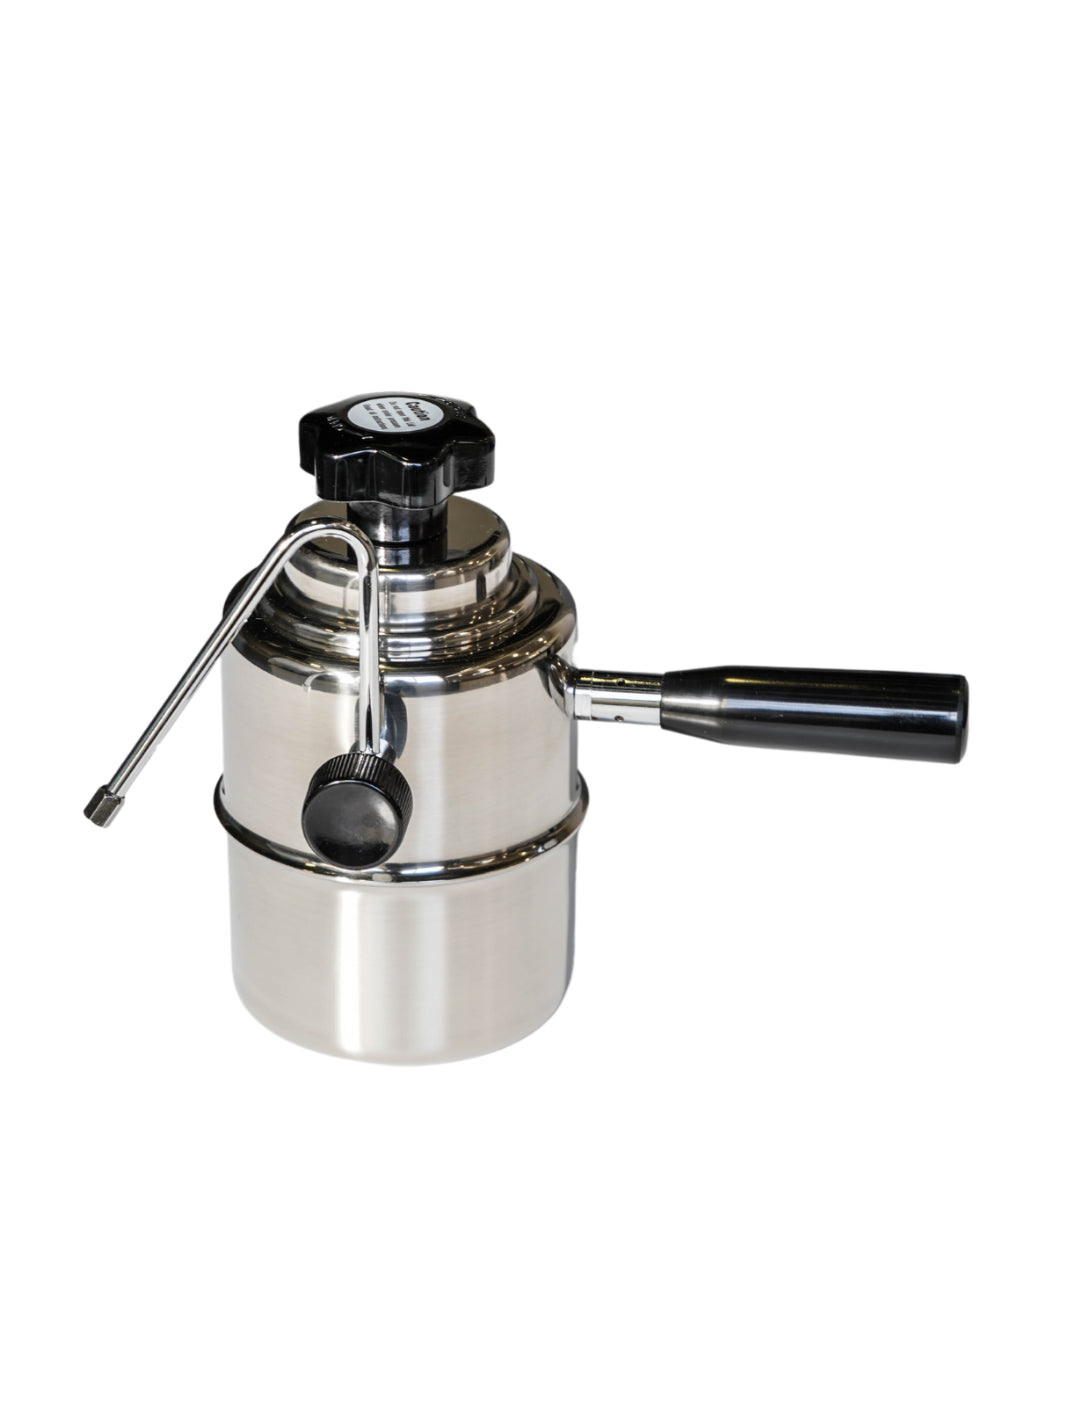 Chinya Milk Frother. Quality Budget Frother Reviewed in 2022